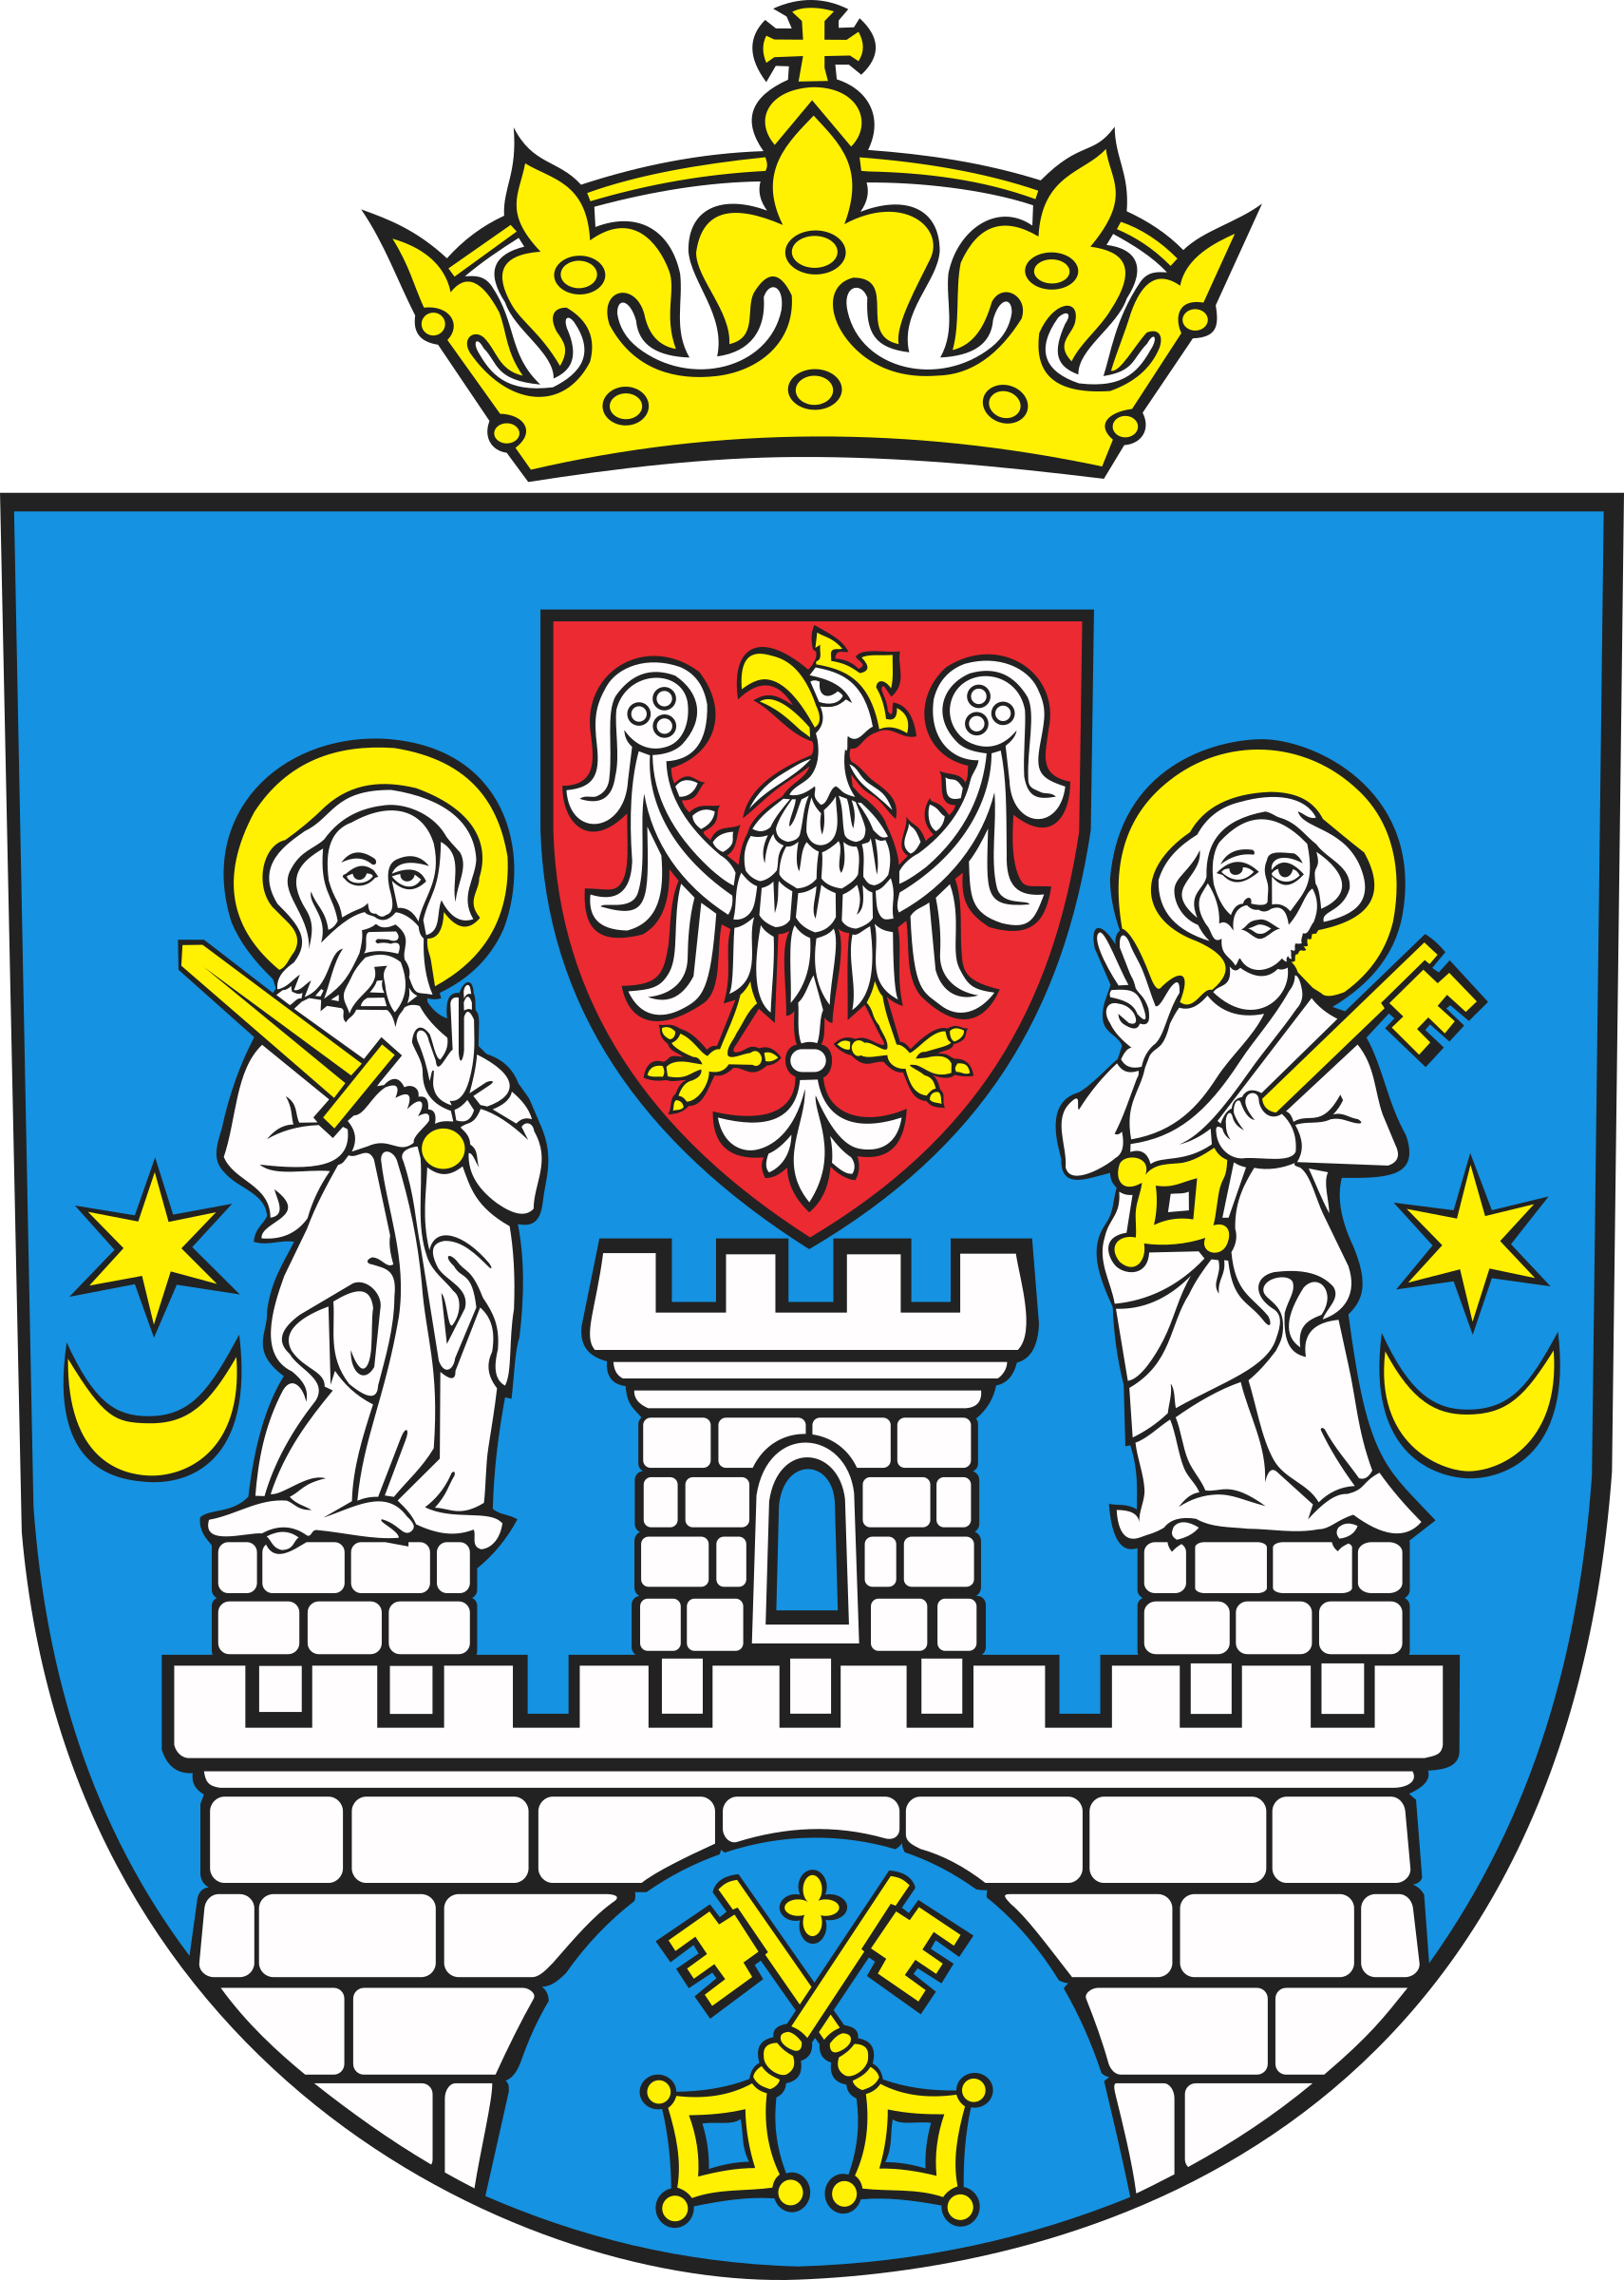 Poznan coat of arms. Tower clipart heraldic